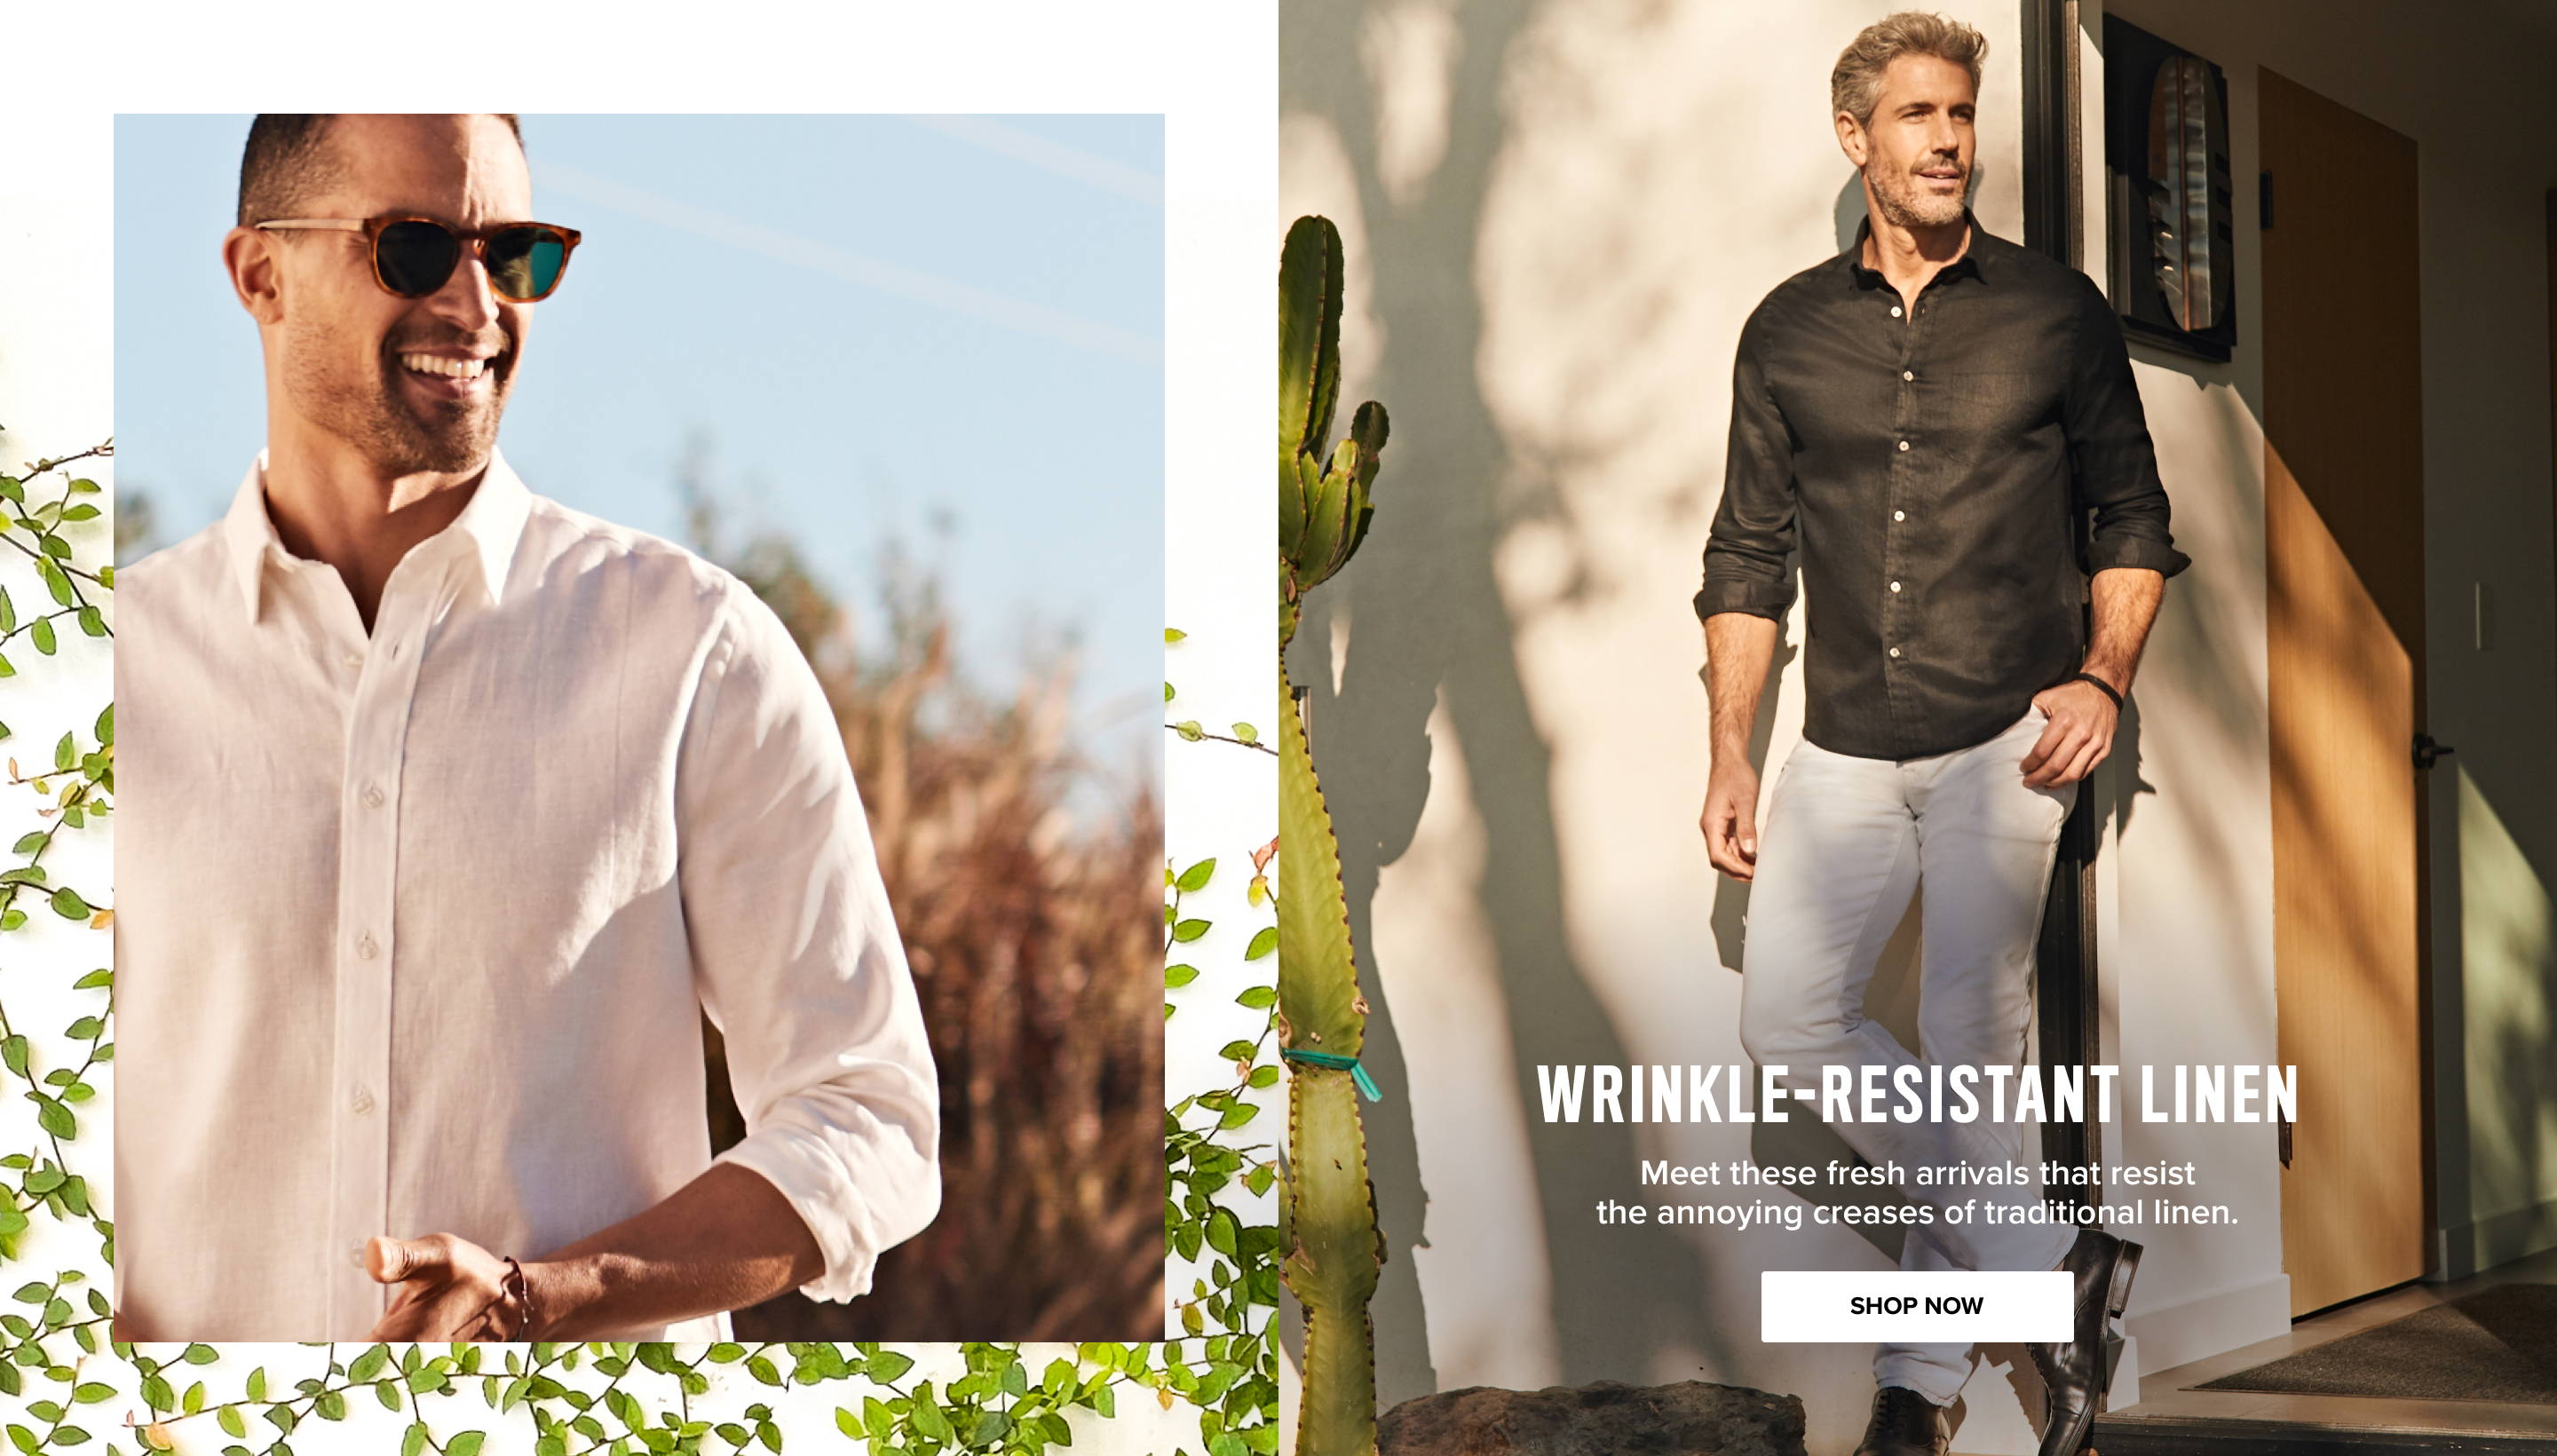 Wrinkle Resistent Linen —Meet these fresh arrivals that resist the annoying creases of traditional linen.